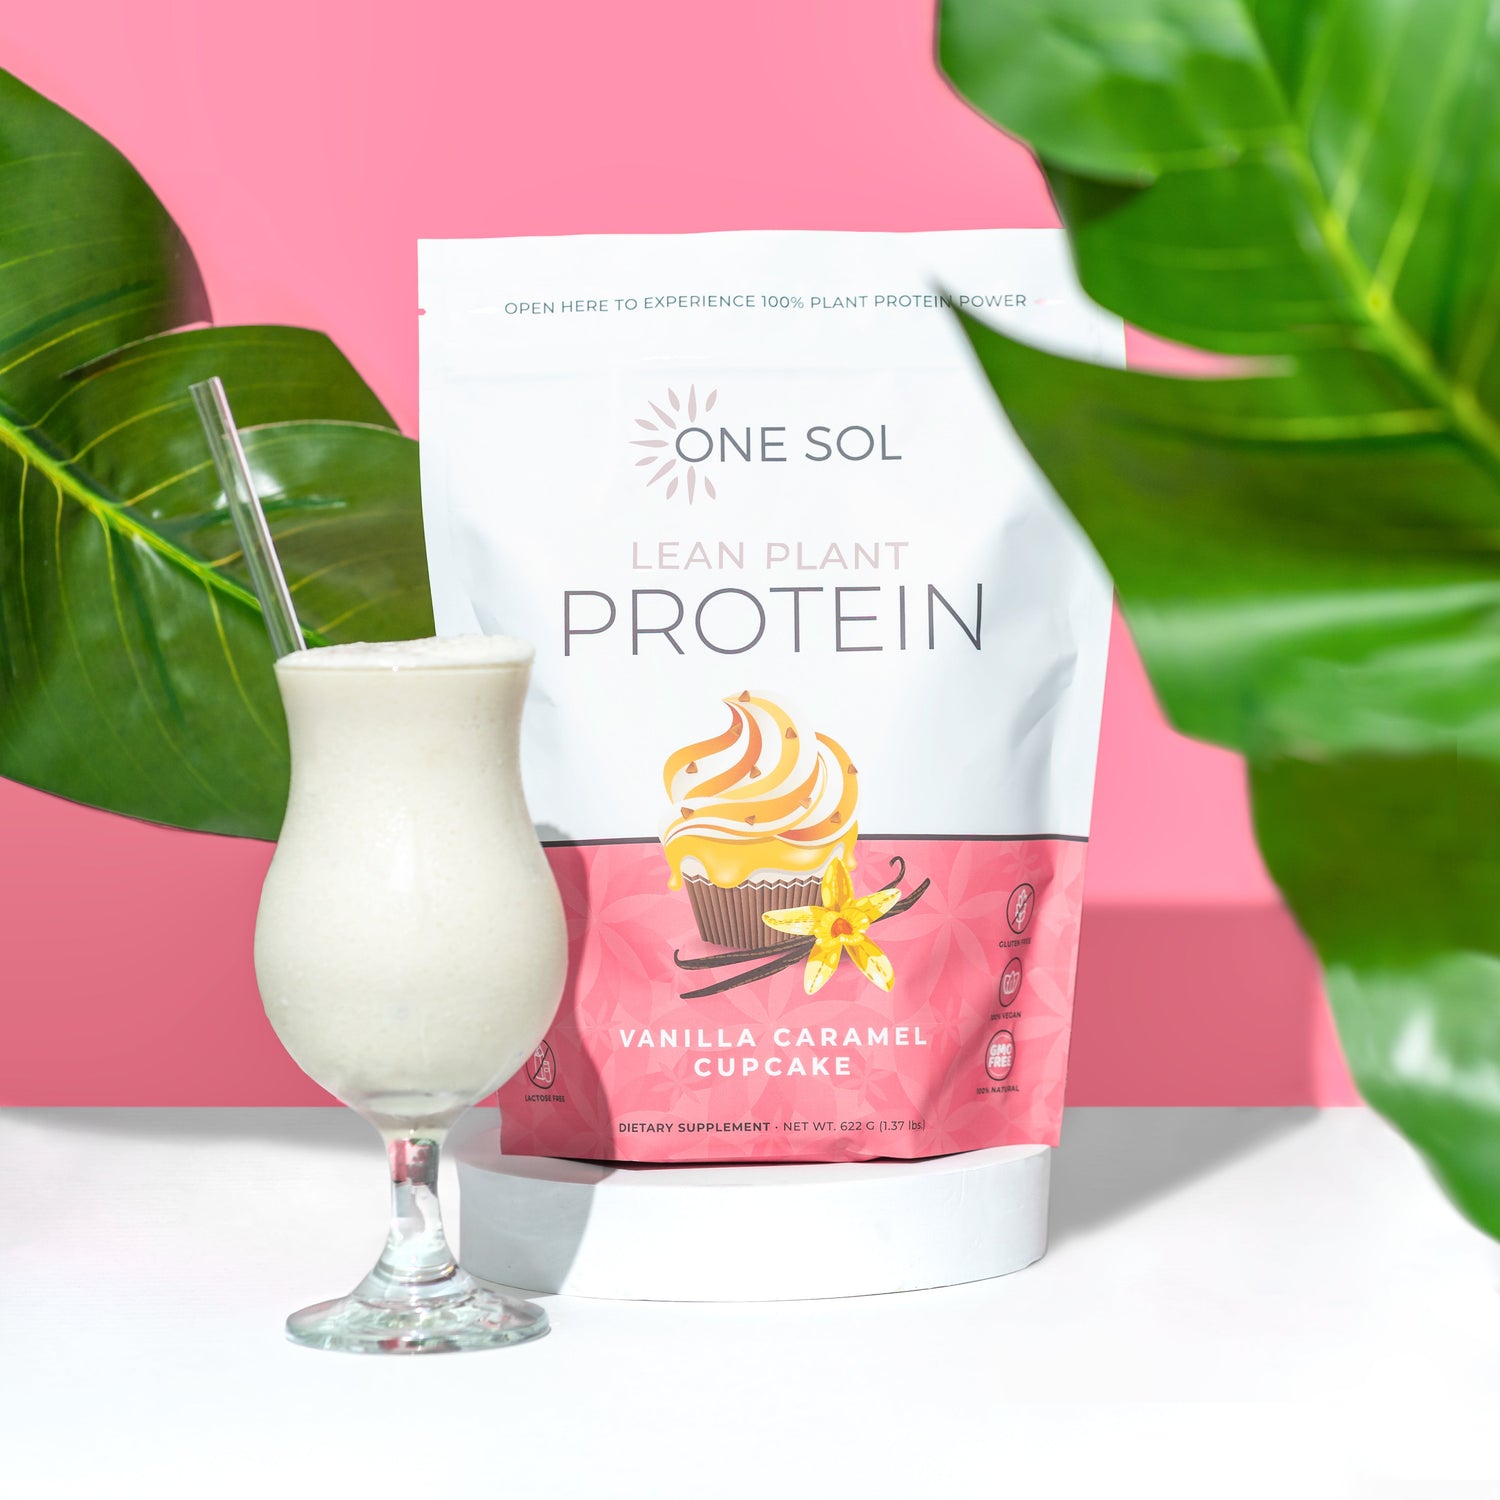 One Sol Lean Plant Protein Powder Horchata, Low Carb, Gluten Free, Lactose-Free